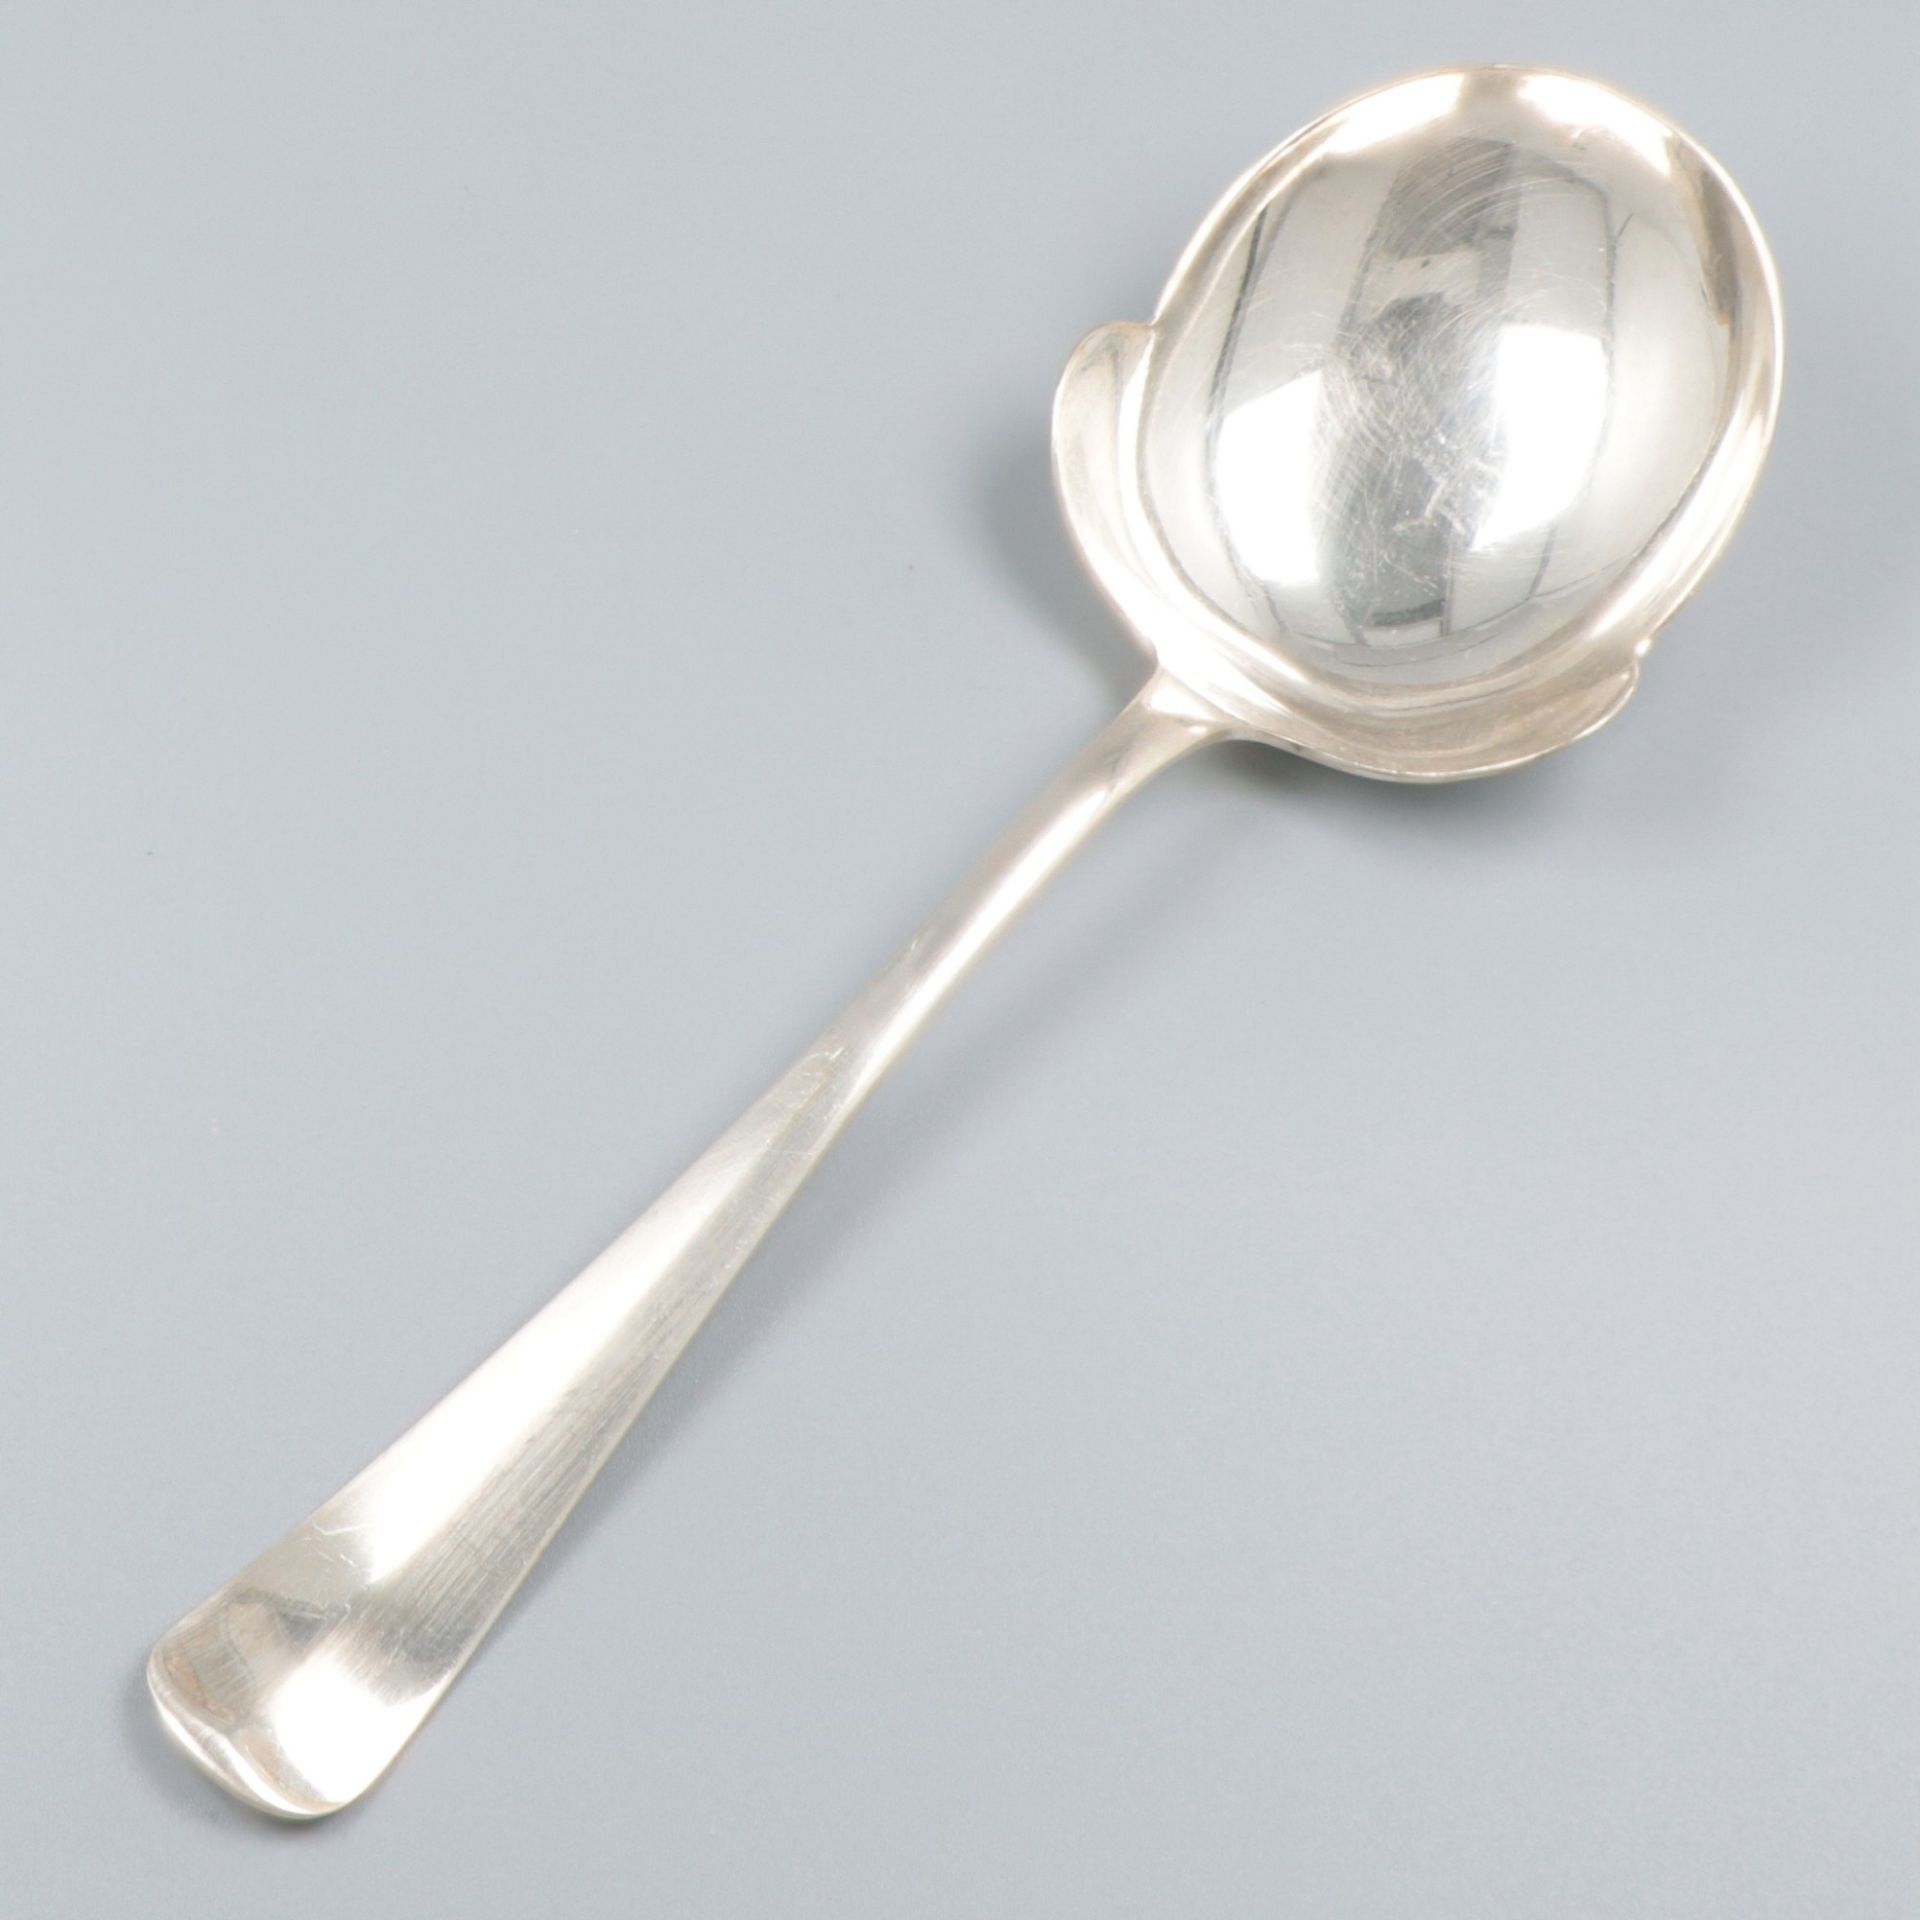 Sauce spoon, vegetable serving spoon & potato serving spoon "Haags Lofje", silver. - Image 3 of 6